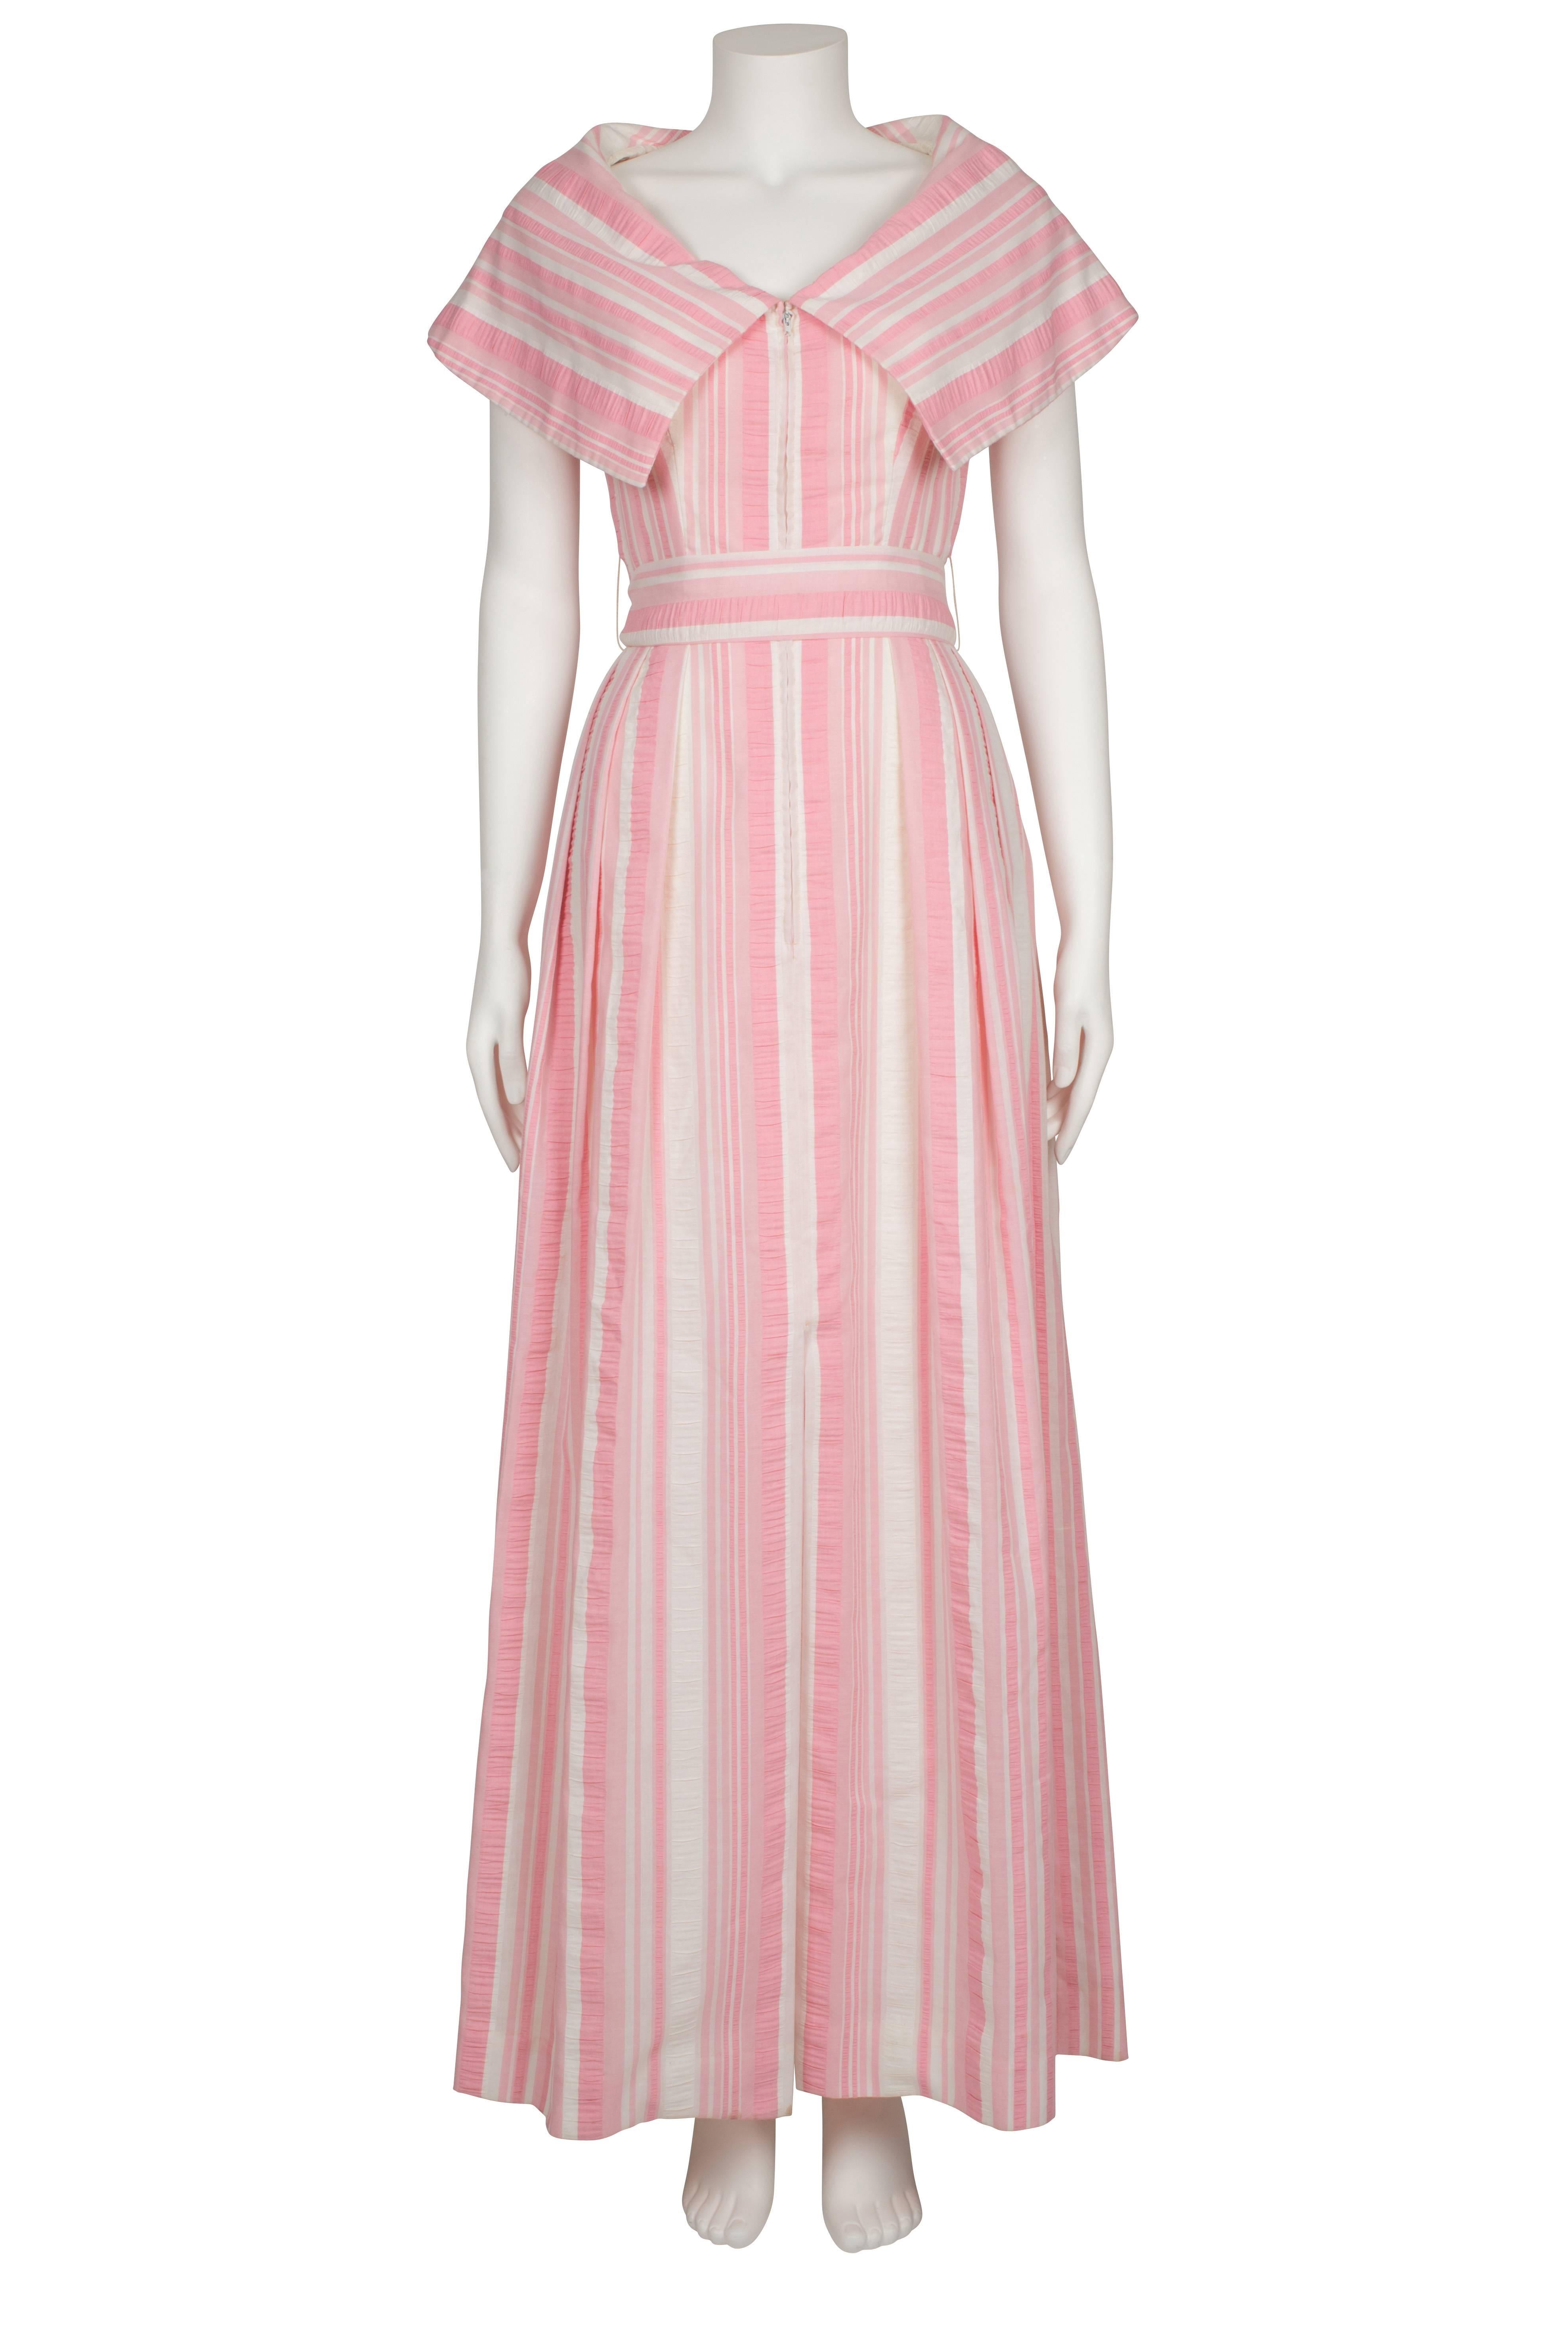 1970s Estevez Seersucker Pink and Ivory Candy Stripe Dress Size S In Excellent Condition For Sale In London, GB